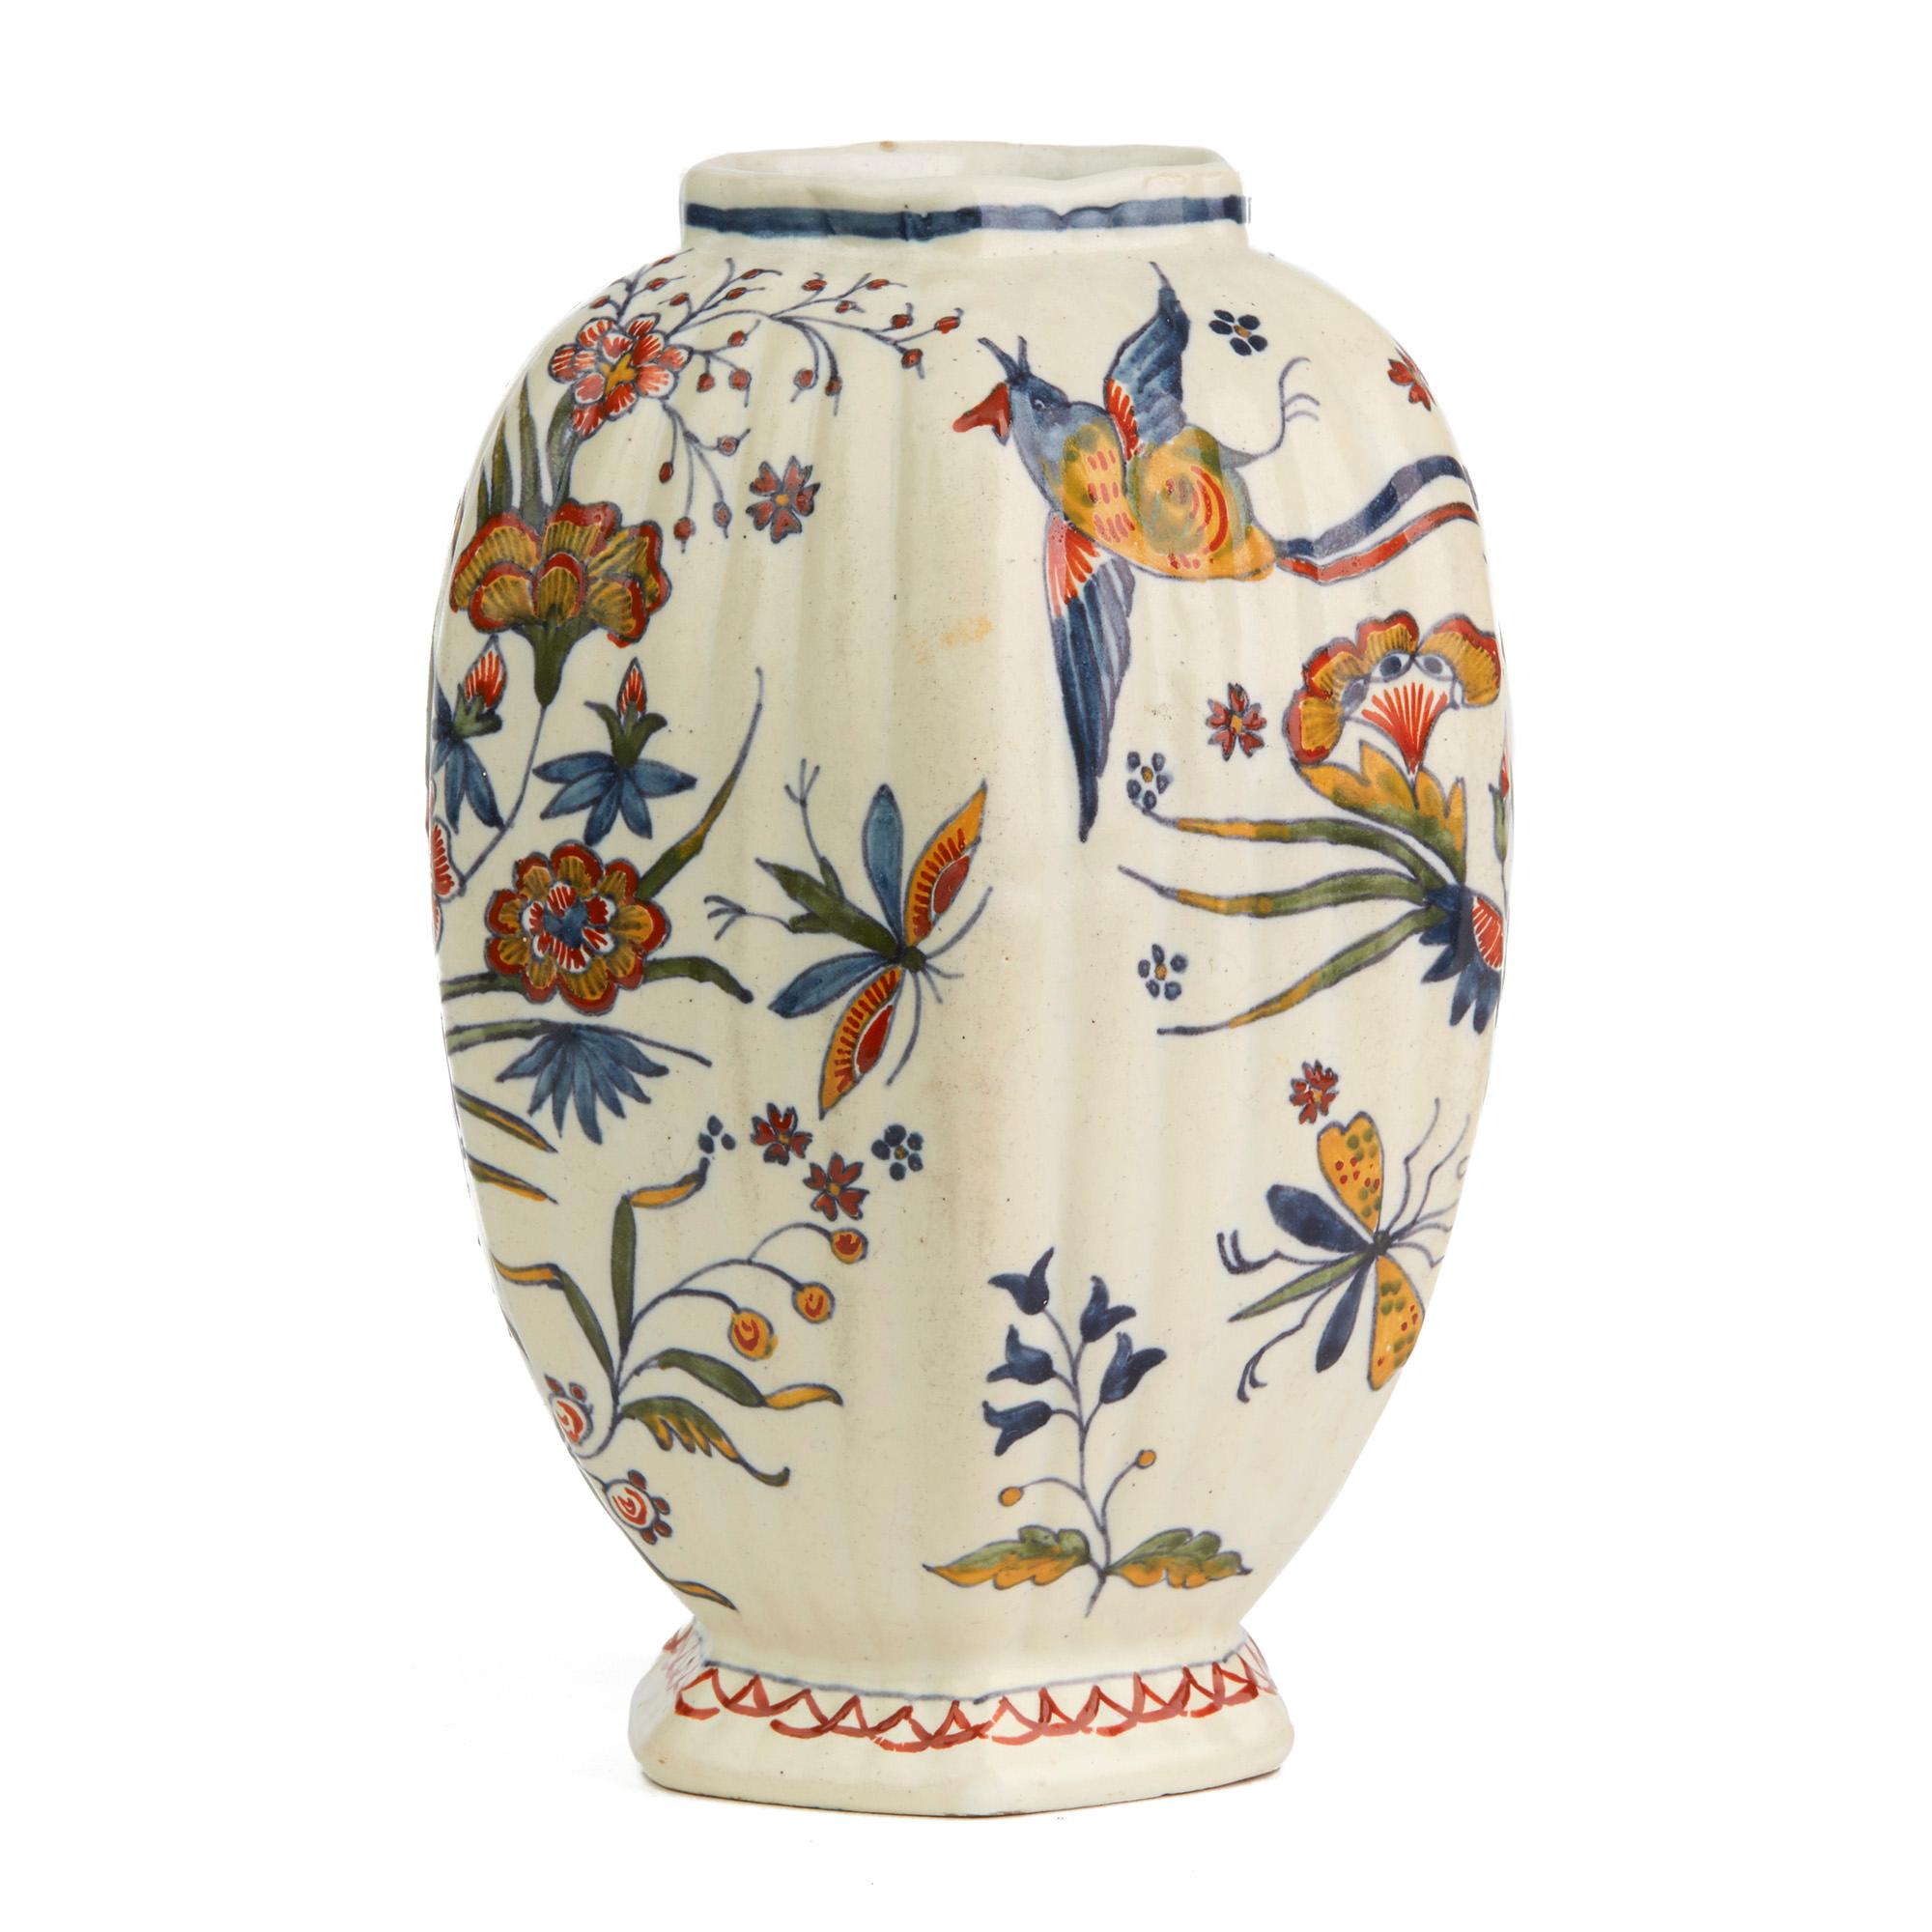 Delft Faience Polychrome Painted Pottery Vase, 18th-19th Century 1